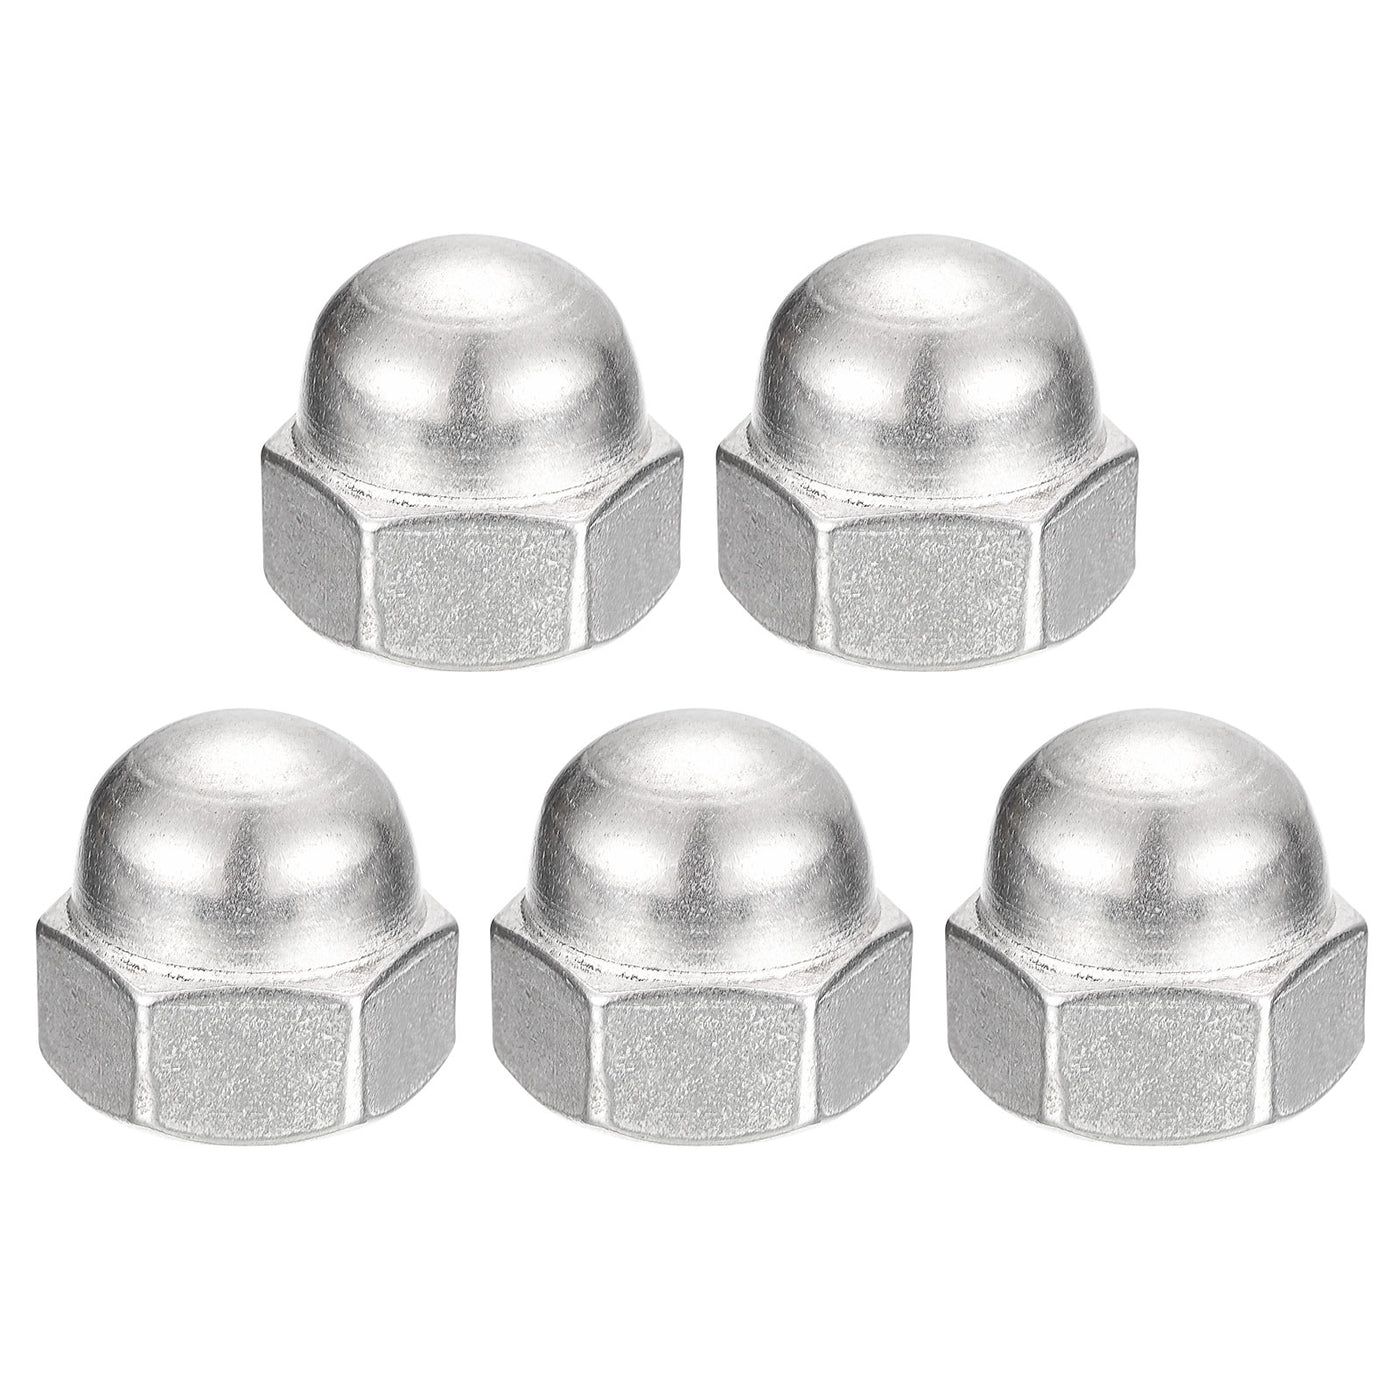 uxcell Uxcell 5/8-11 Acorn Cap Nuts,5pcs - 304 Stainless Steel Hardware Nuts, Acorn Hex Cap Dome Head Nuts for Fasteners (Silver)